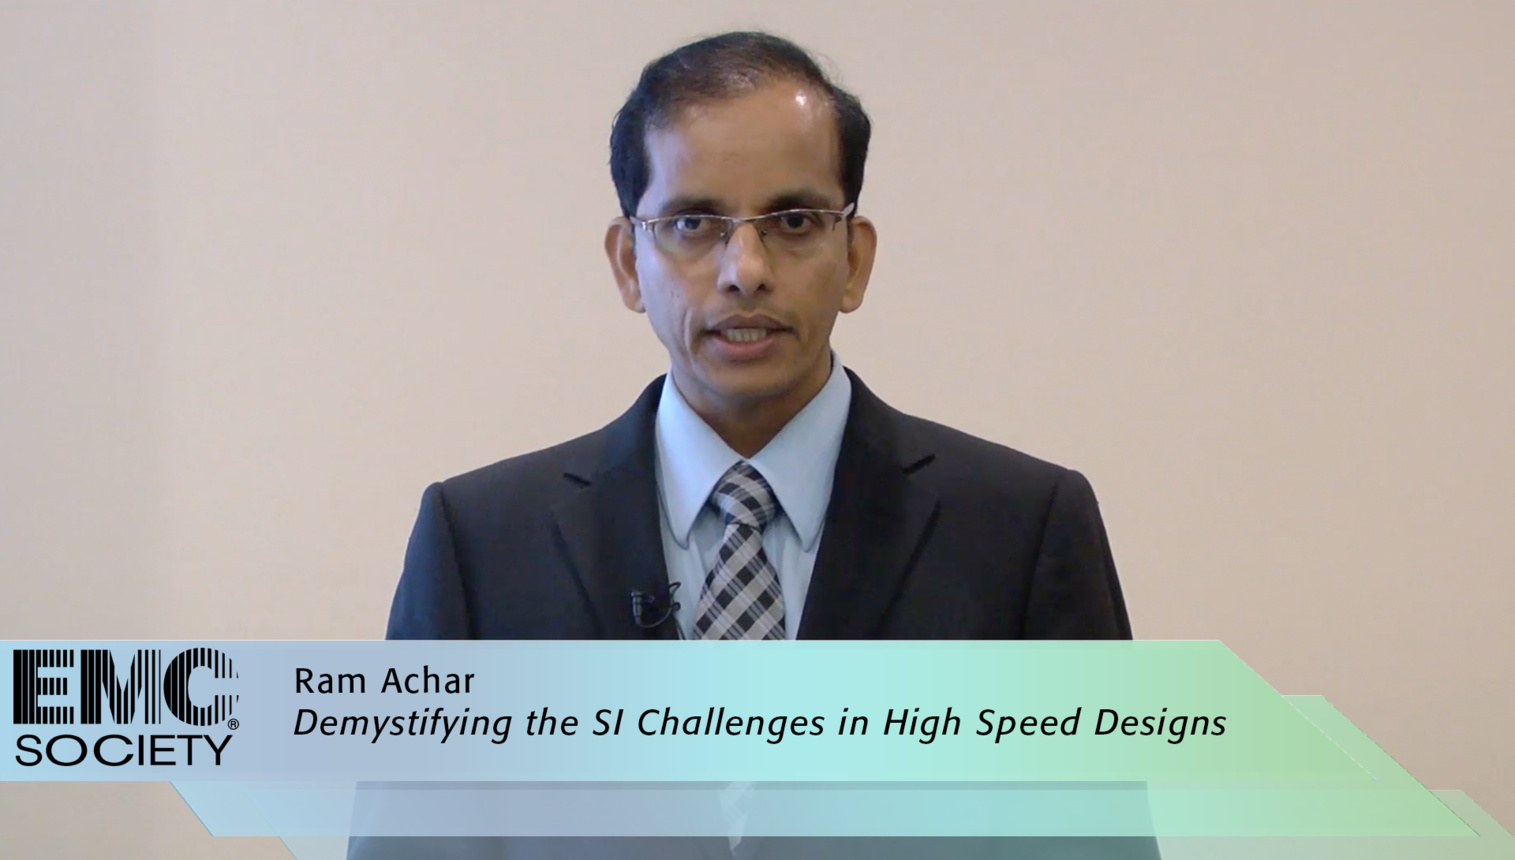 EMC - Ram Achar - Demystifying the Signal Integrity Challenges in High-Speed Designs